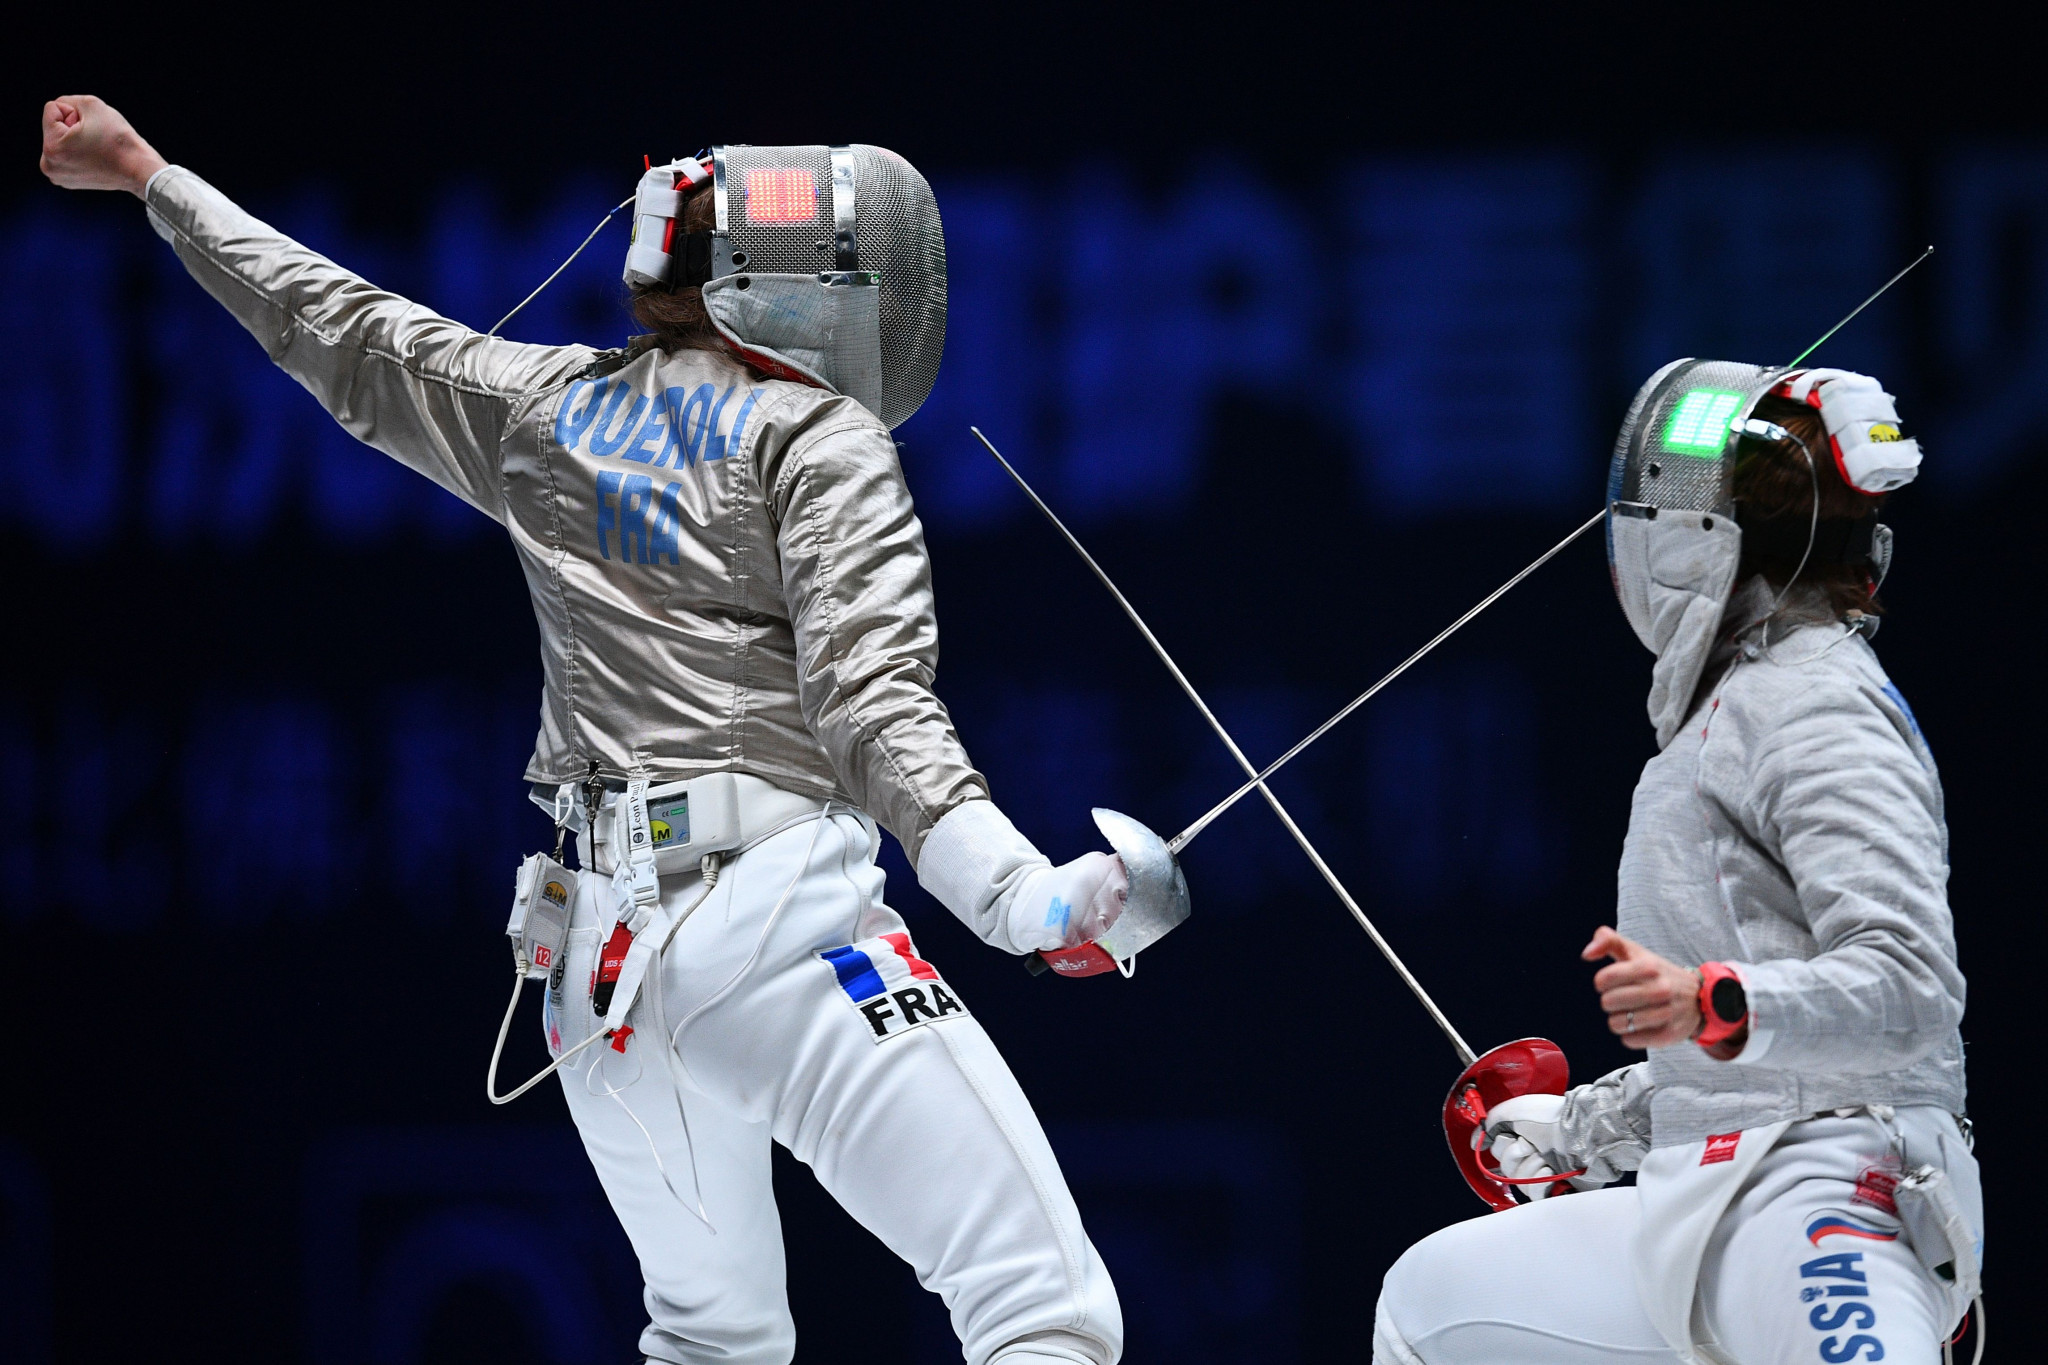 Caroline Queroli was part of the French women's sabre team that won gold ©Getty Images